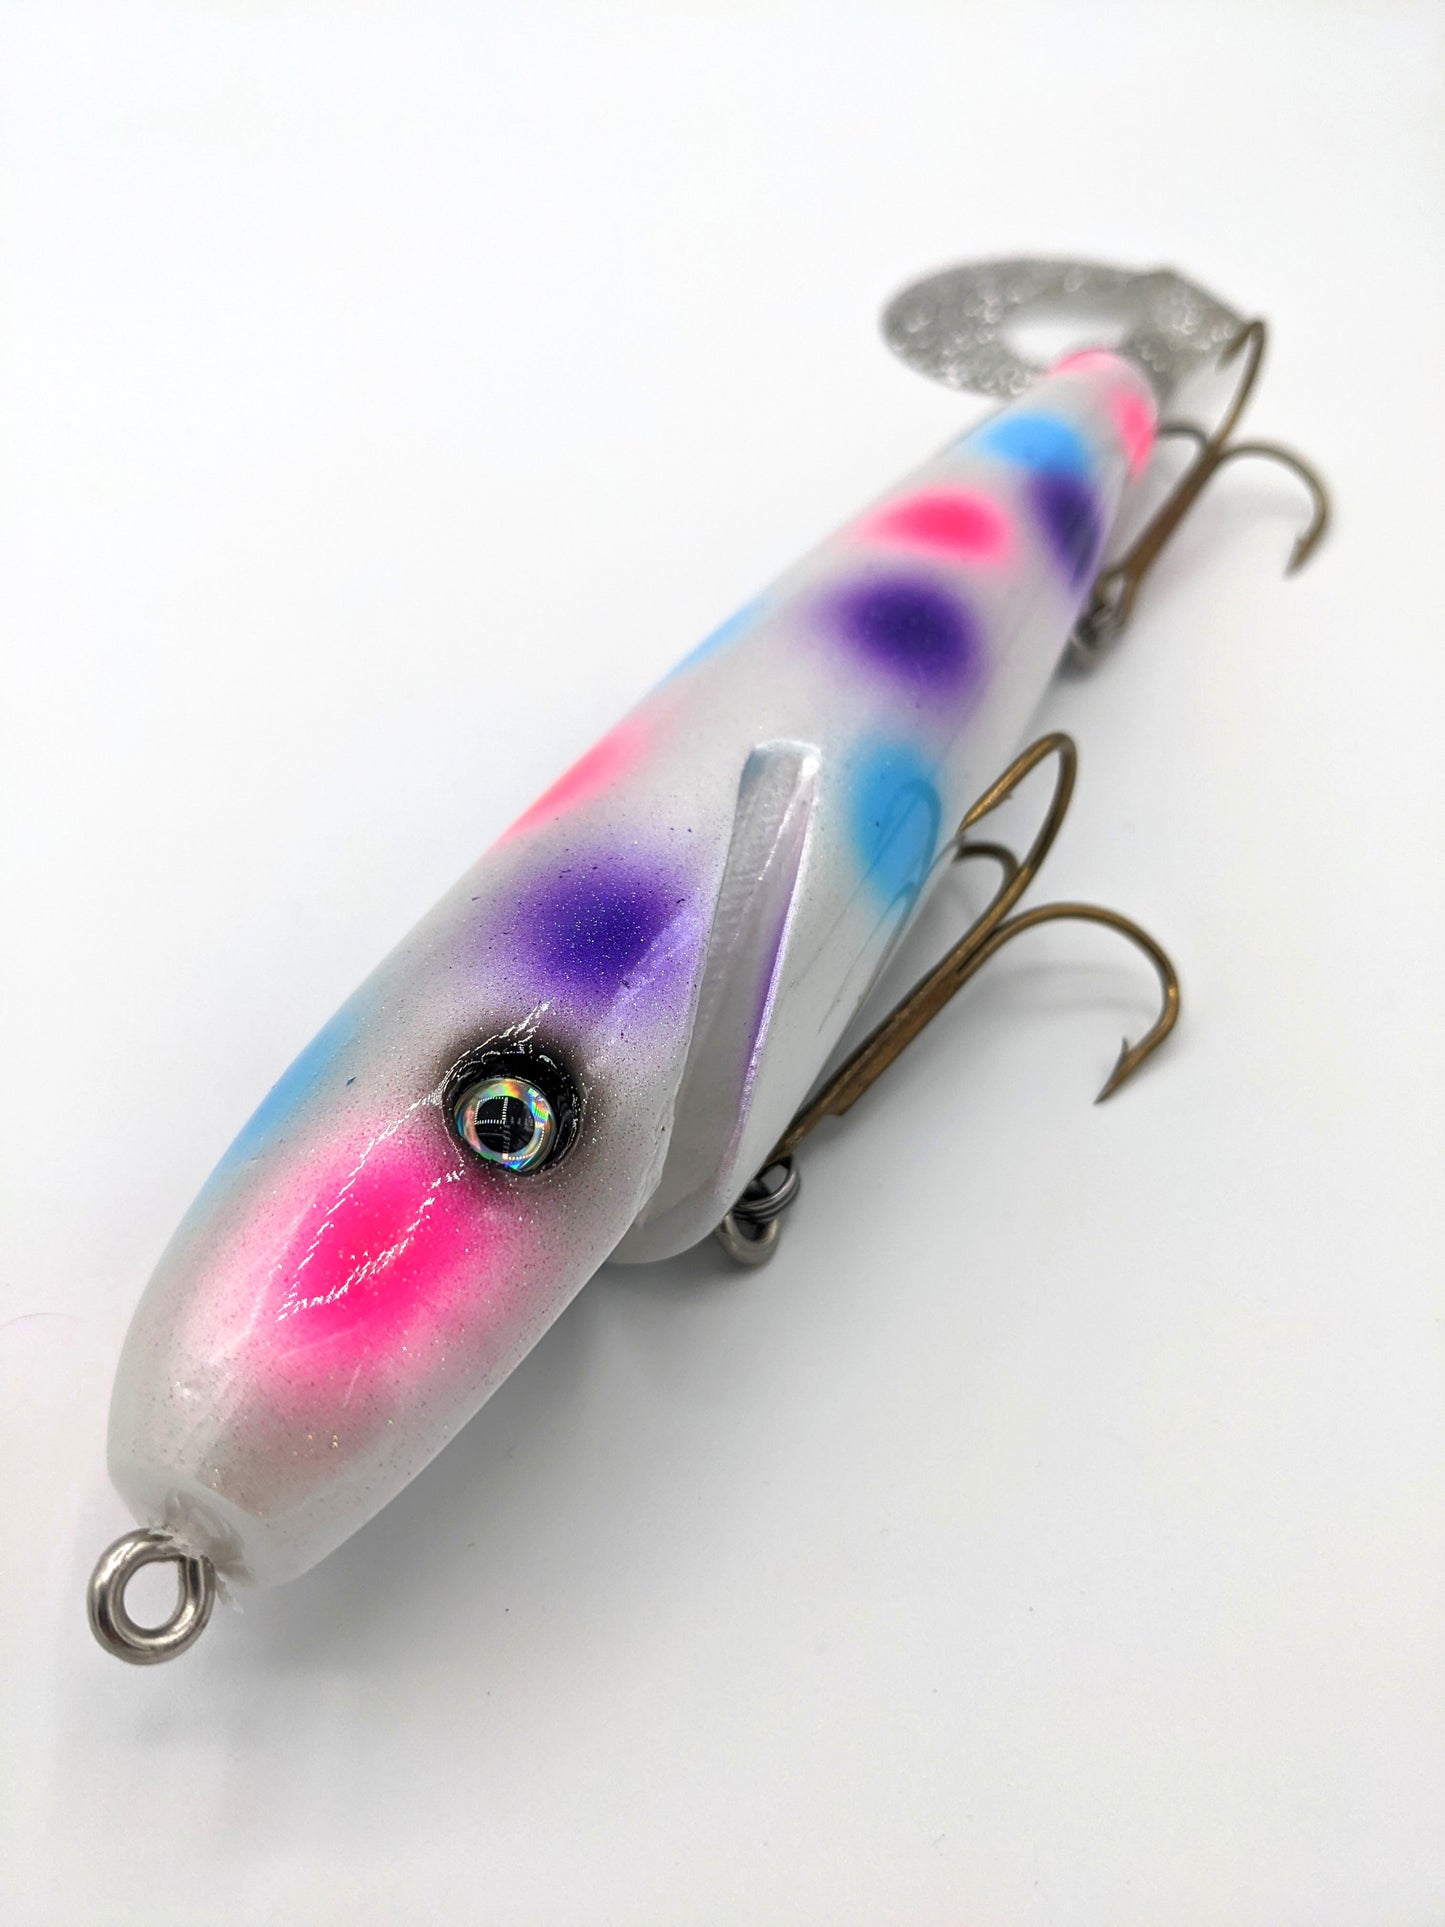 Leo Lures 8" Jerk/Rubber Tail